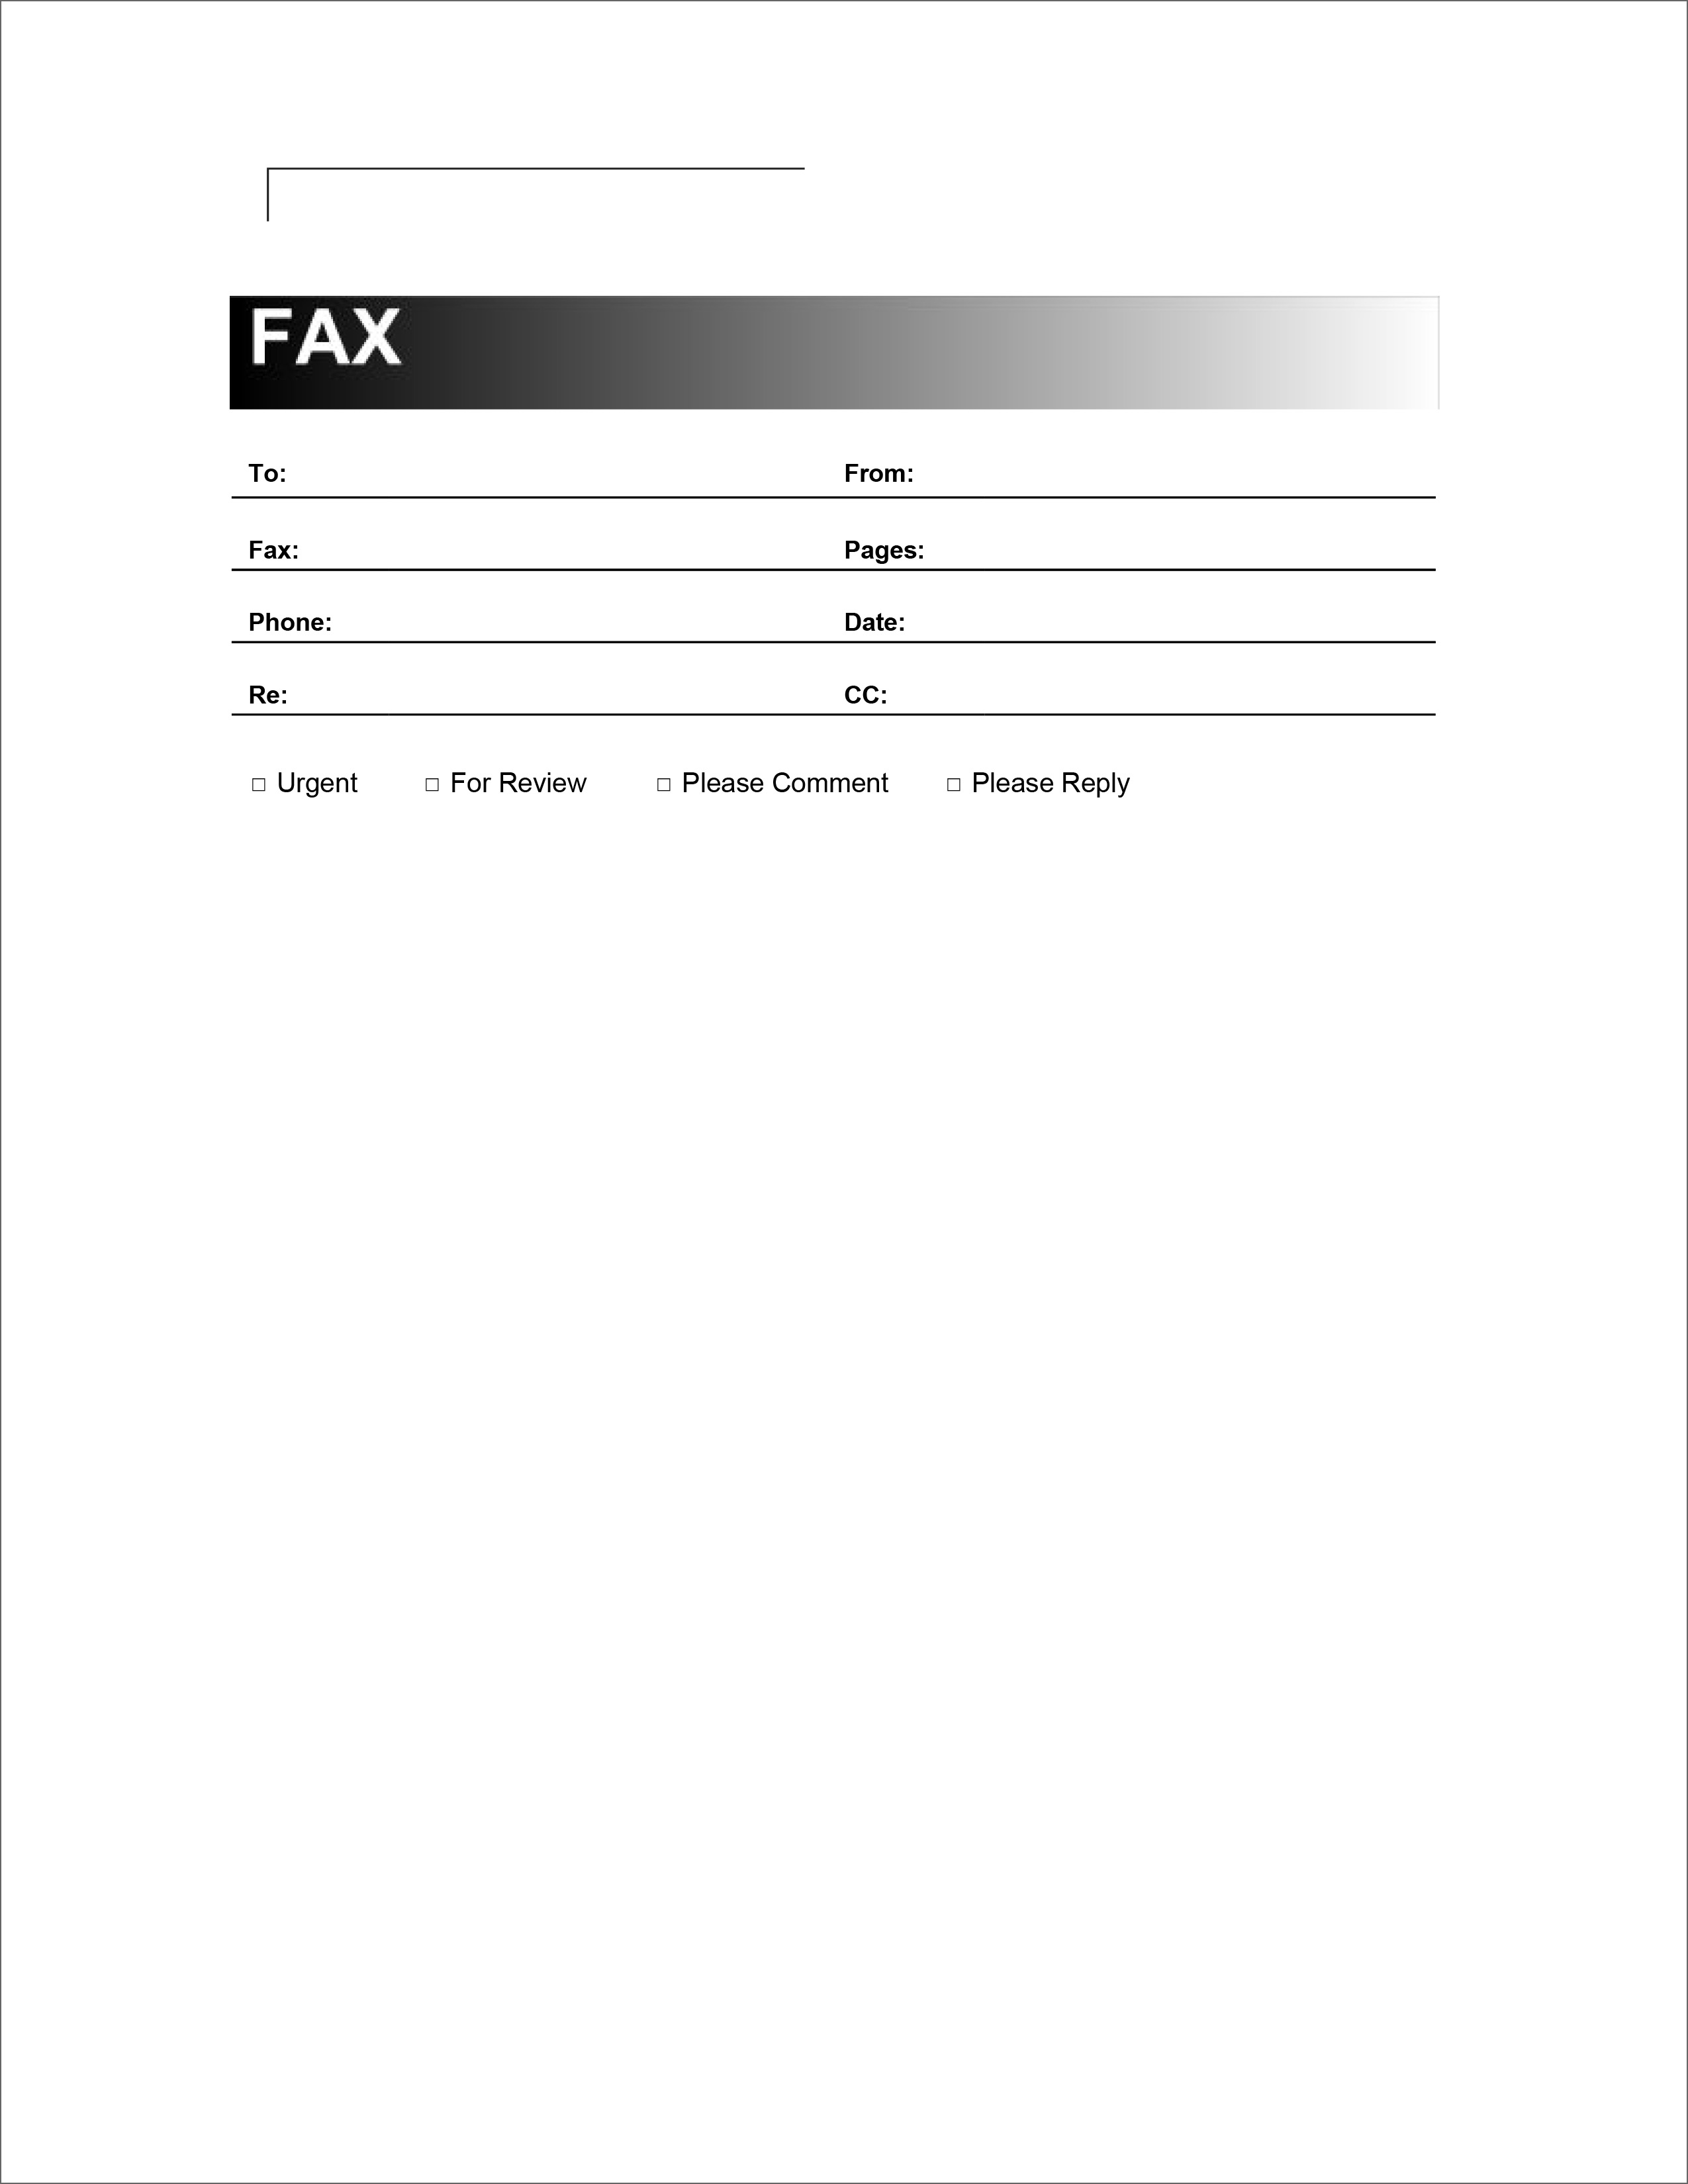 20 Free Fax Cover Templates / Sheets In Microsoft Office DocX With Fax Cover Sheet Template Word 2010